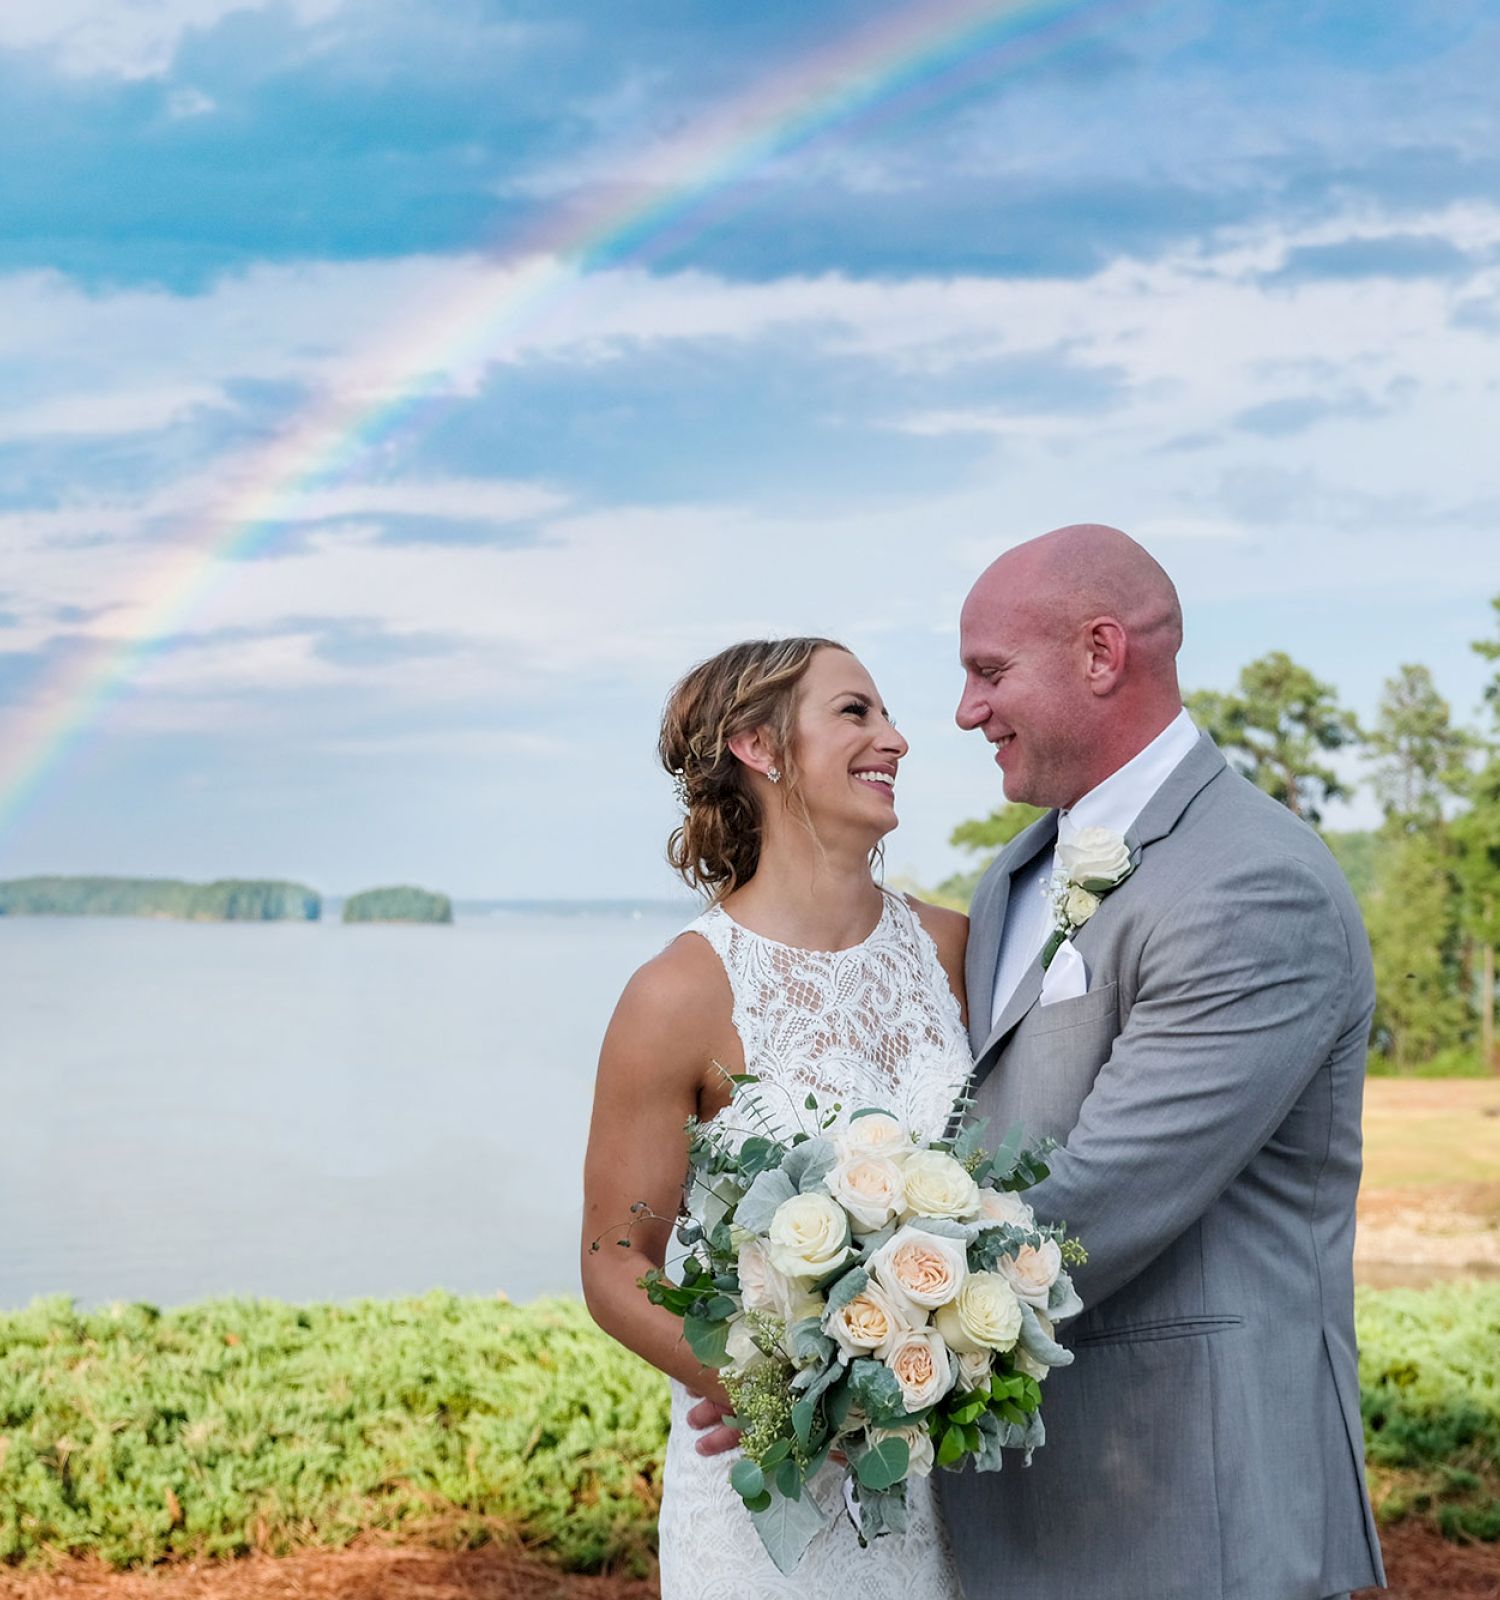 A couple in wedding attire stands by a lake with a rainbow in the background, smiling at each other while holding a bouquet of white roses.